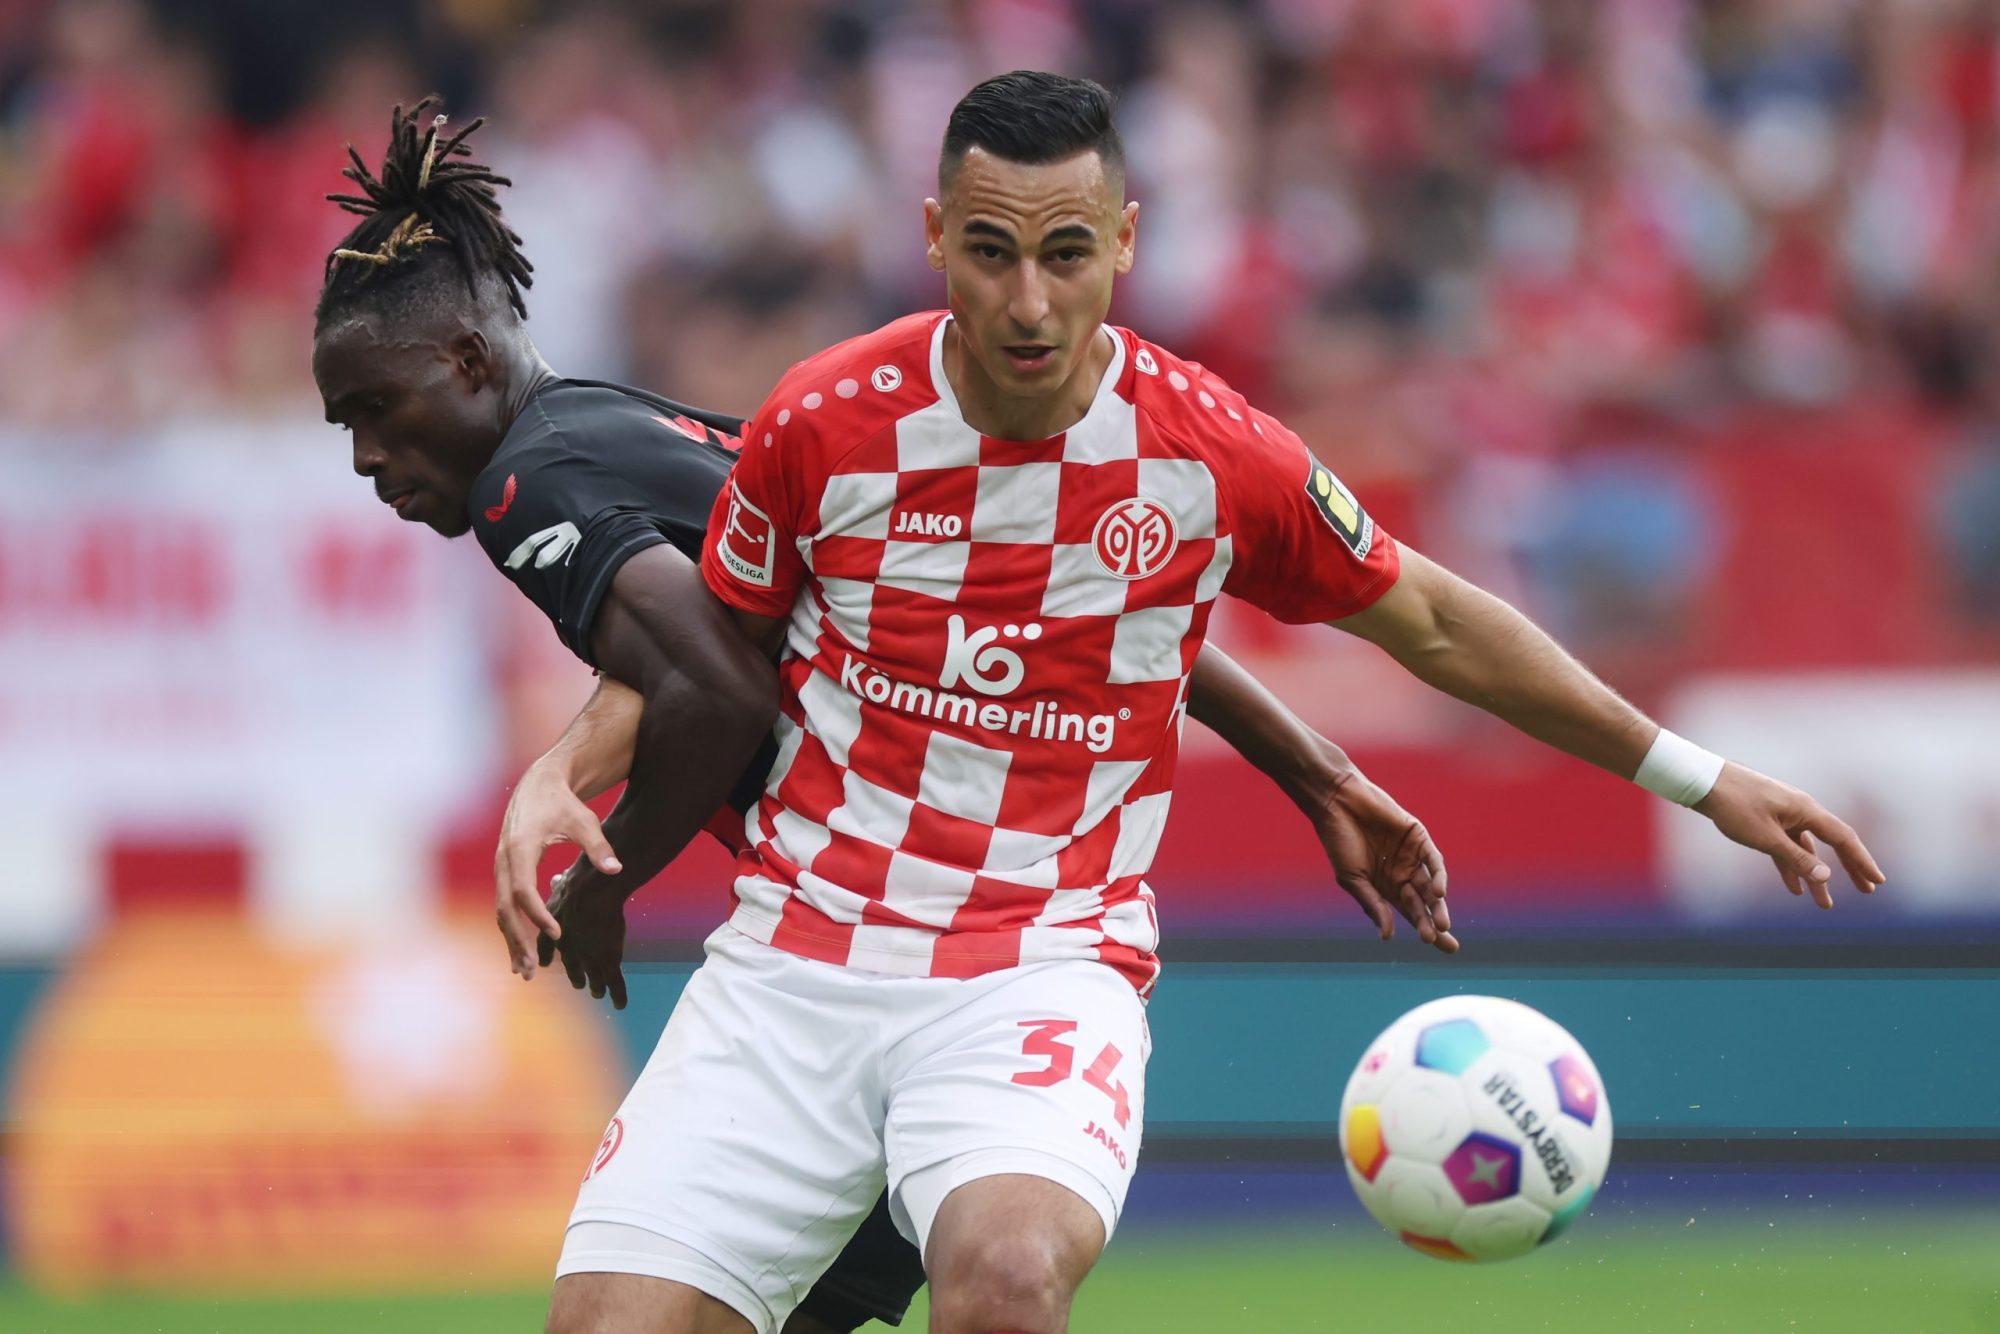 Anwar El Ghazi in the red checkered uniform of the Mainz team, boxing out a challenge on the field from Odilon Kossouneu as the soccer ball flies through the air.